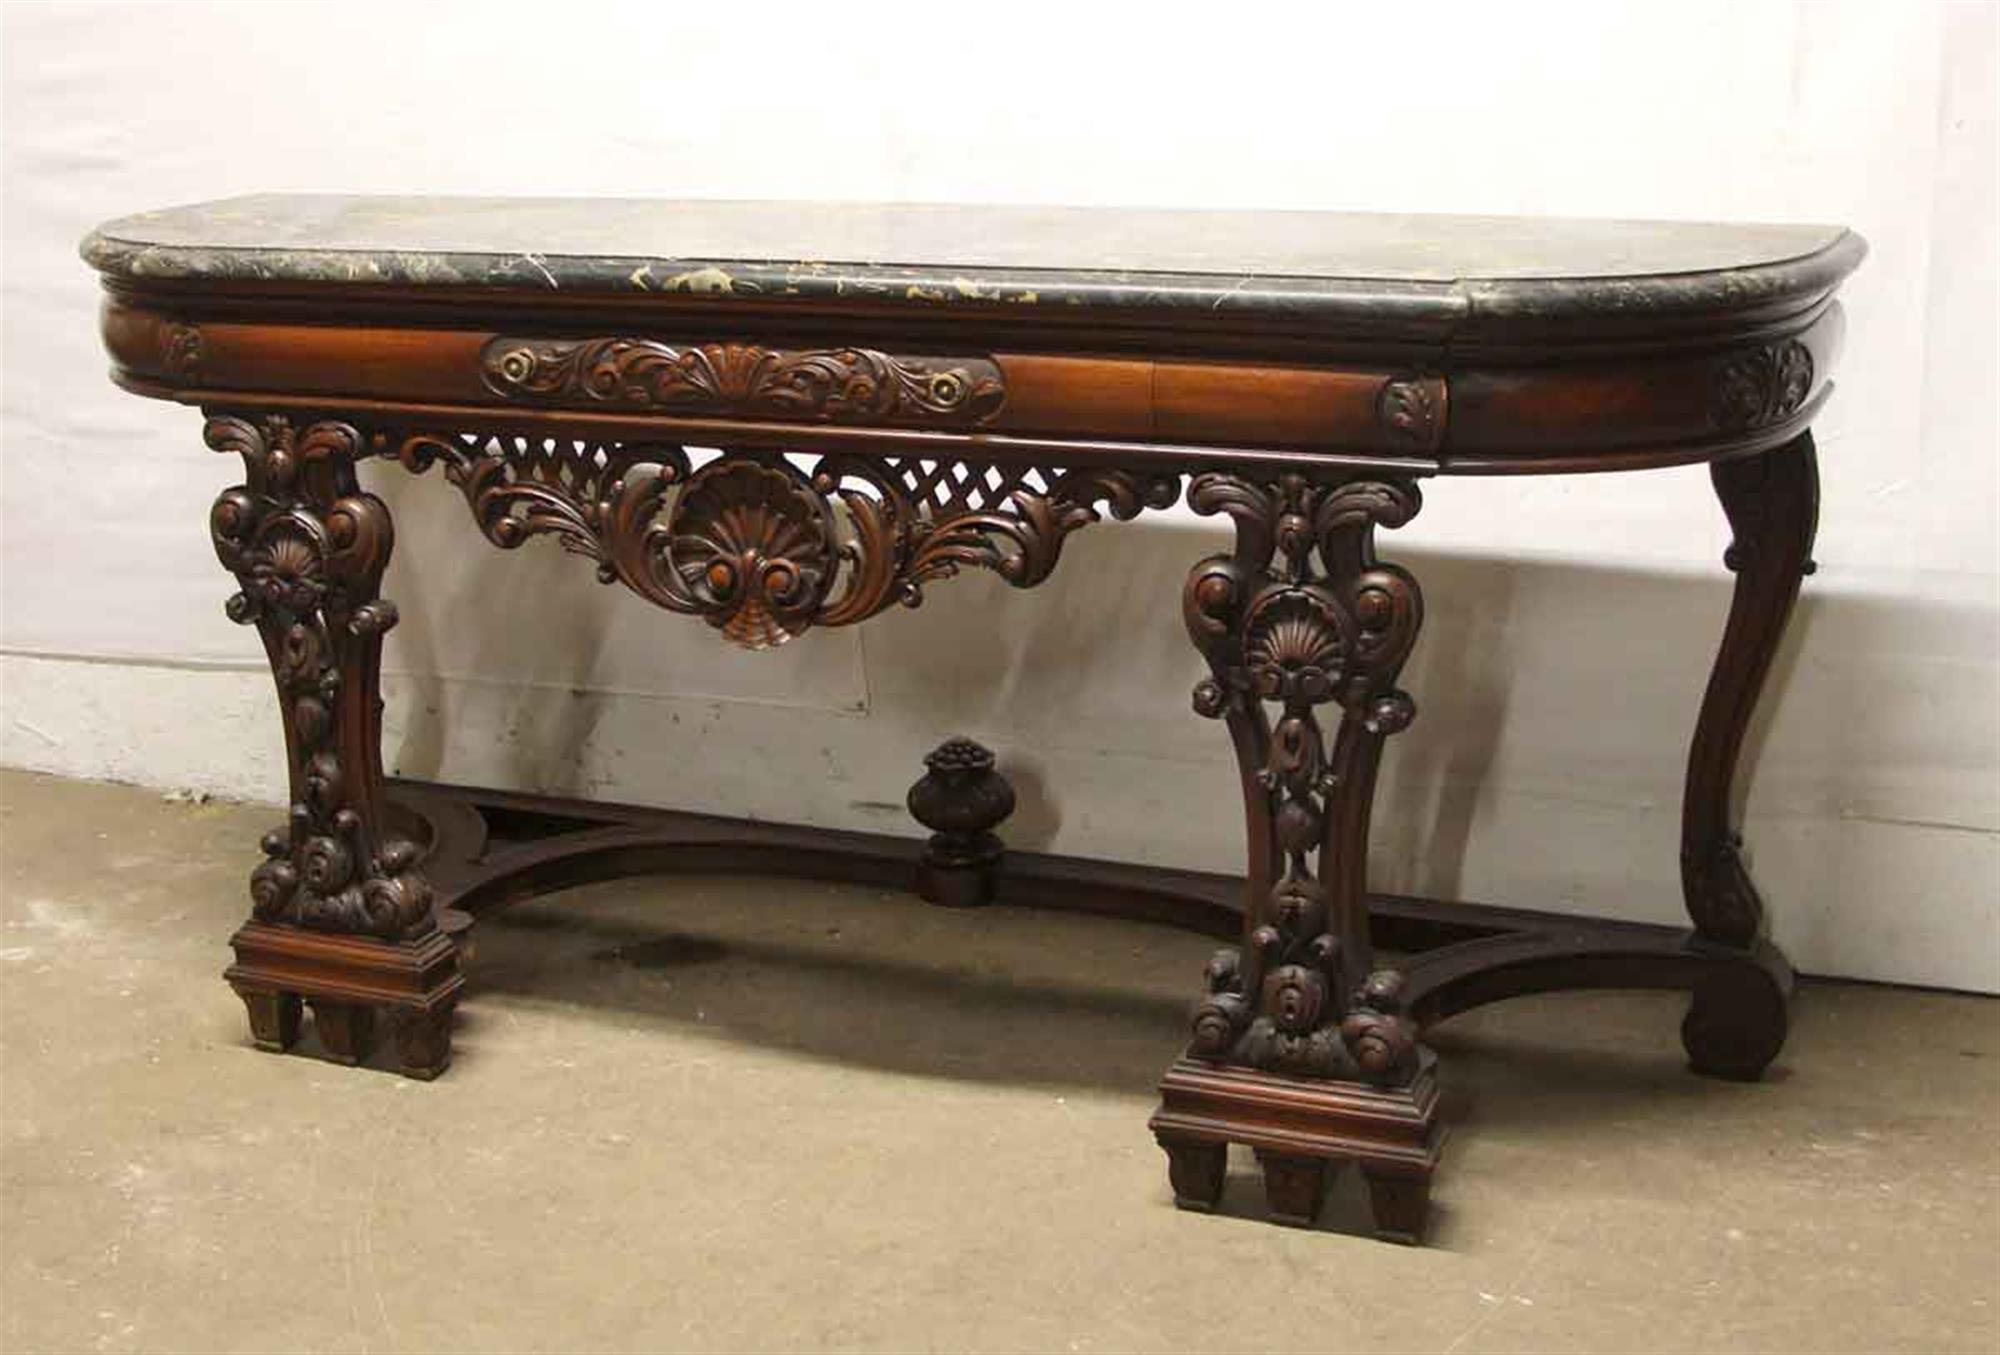 Rococo style intricately carved dark wood tone entry table with a solid black and golf colored marble top, circa 1940s. This is in excellent condition. Made by The Leonardo Co., Inc. NY. This can be seen at our 400 Gilligan St location in Scranton,